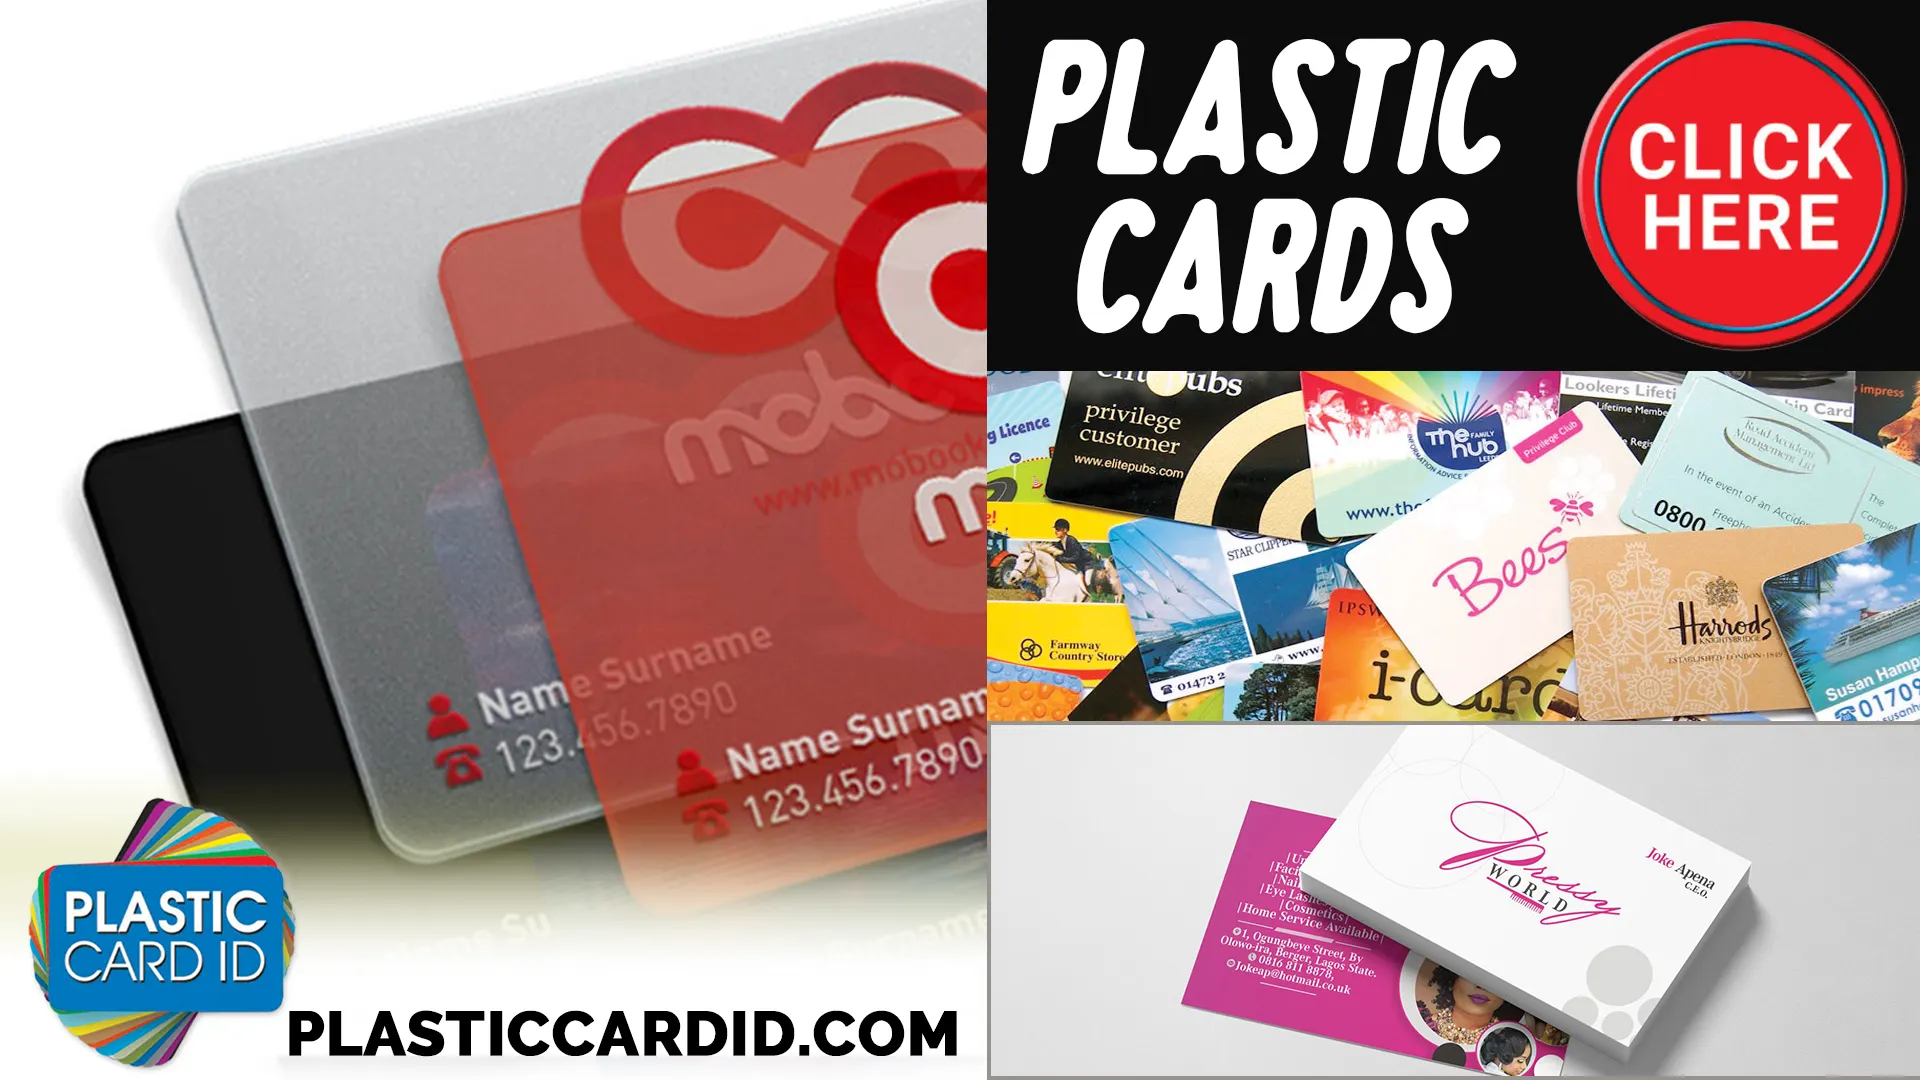 Create an Emotional Connection with Custom Key Tags from Plastic Card ID
